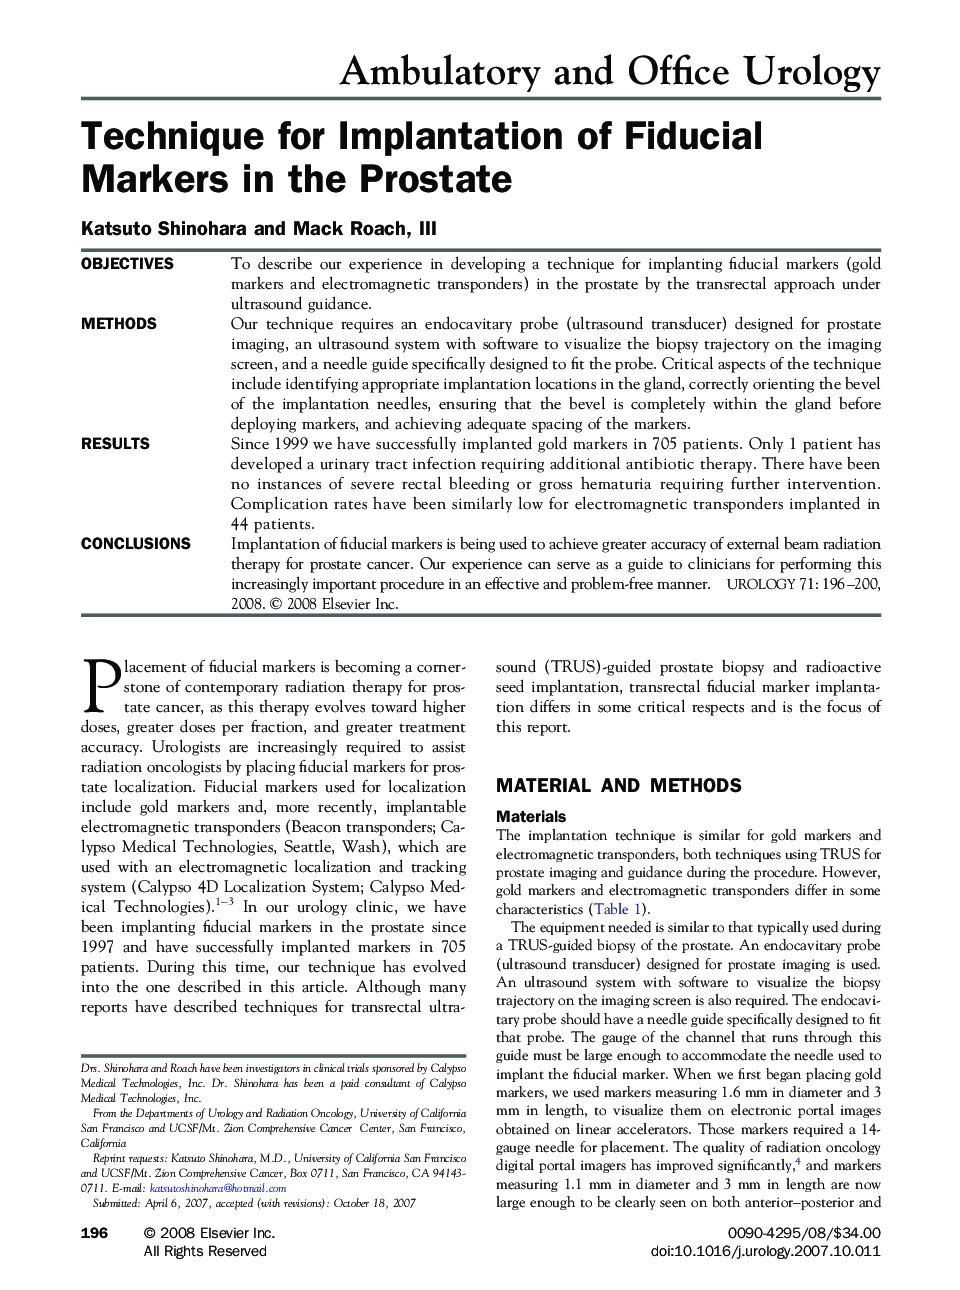 Technique for Implantation of Fiducial Markers in the Prostate